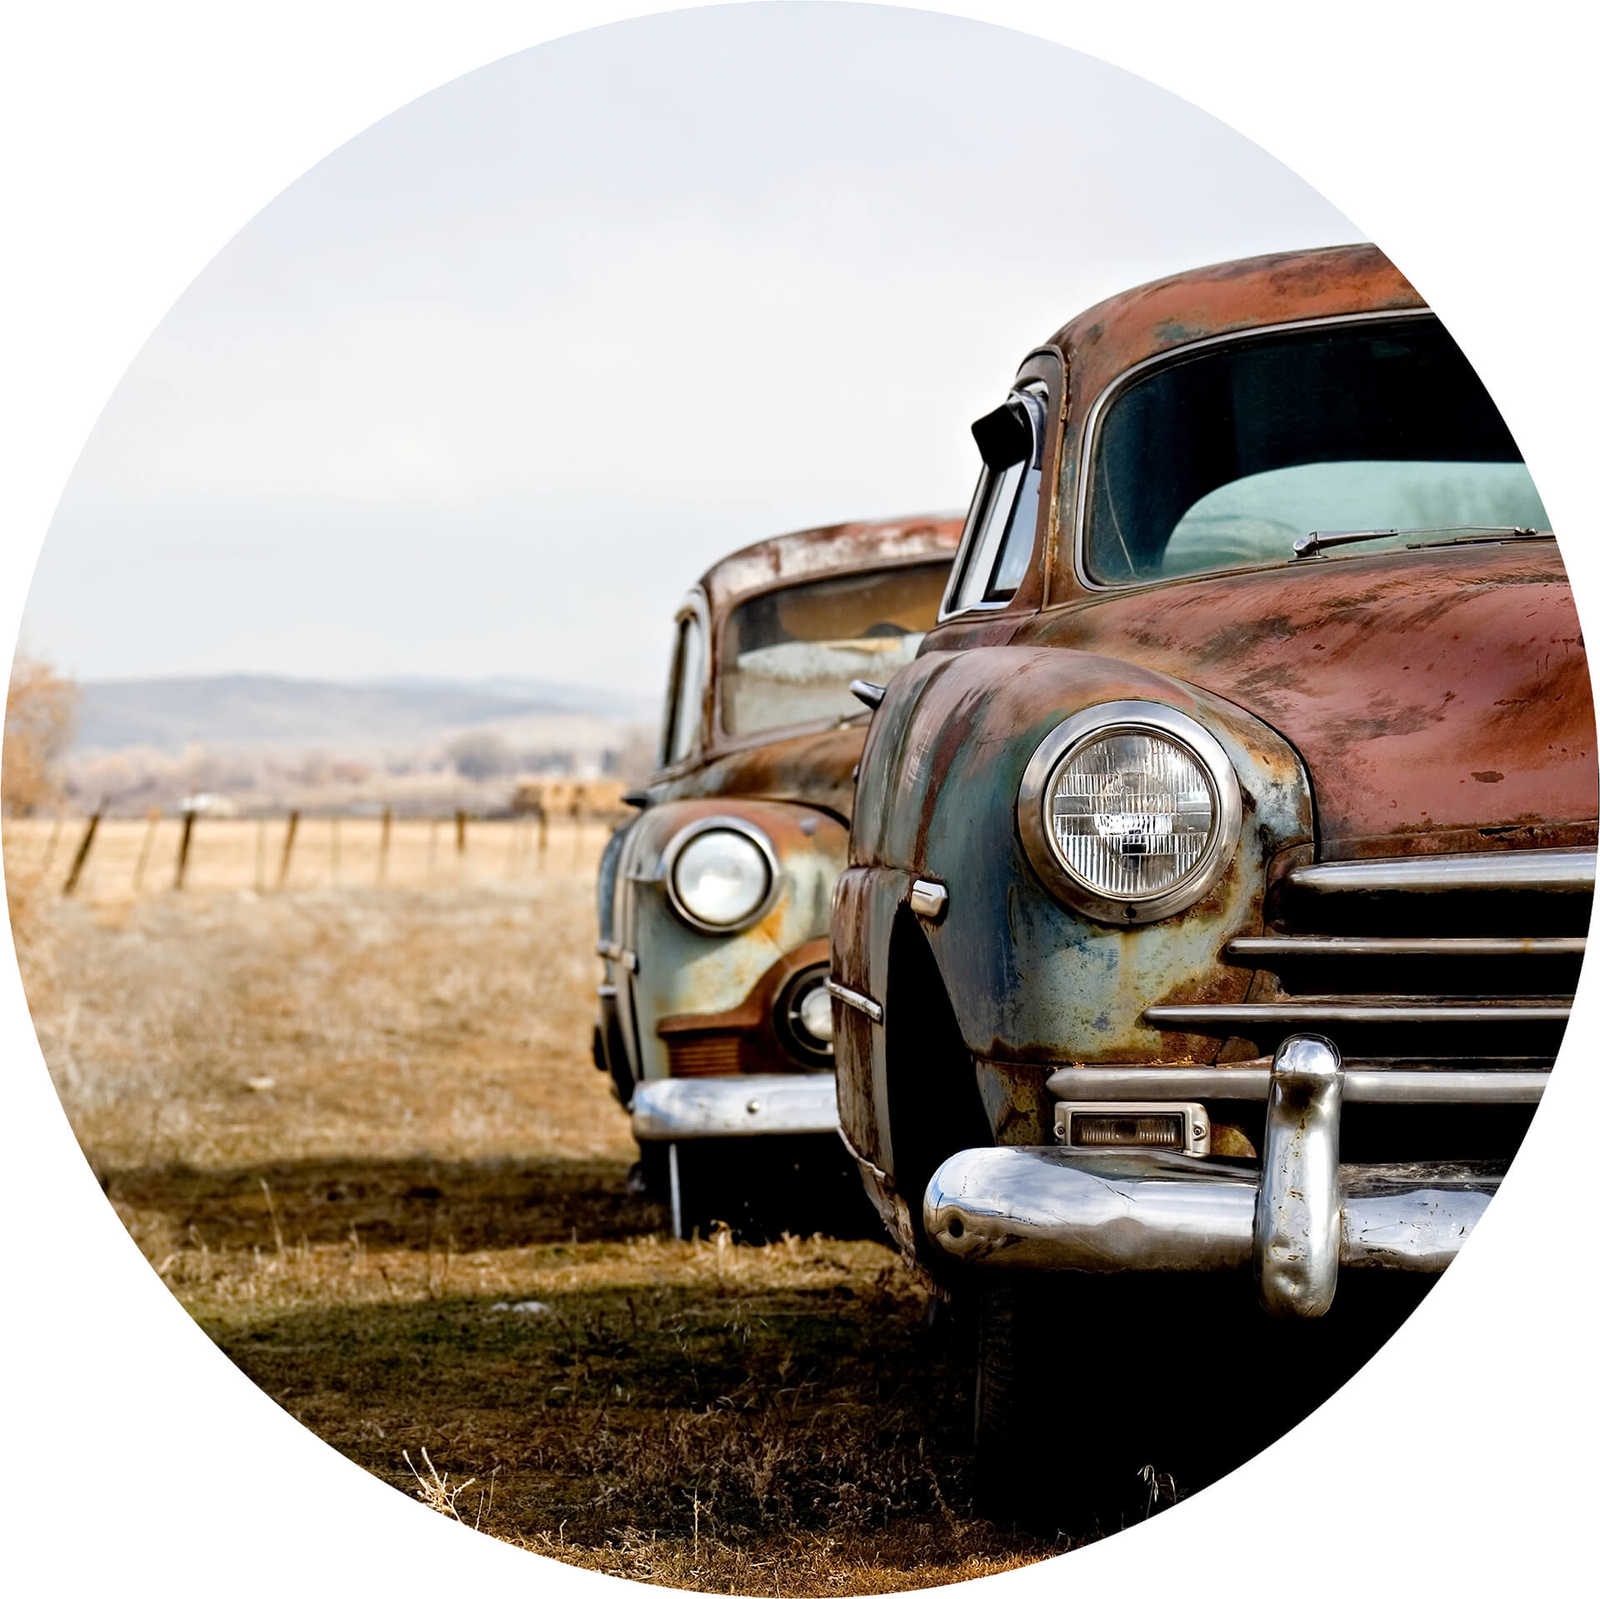         Photo wallpaper round old rusty car
    